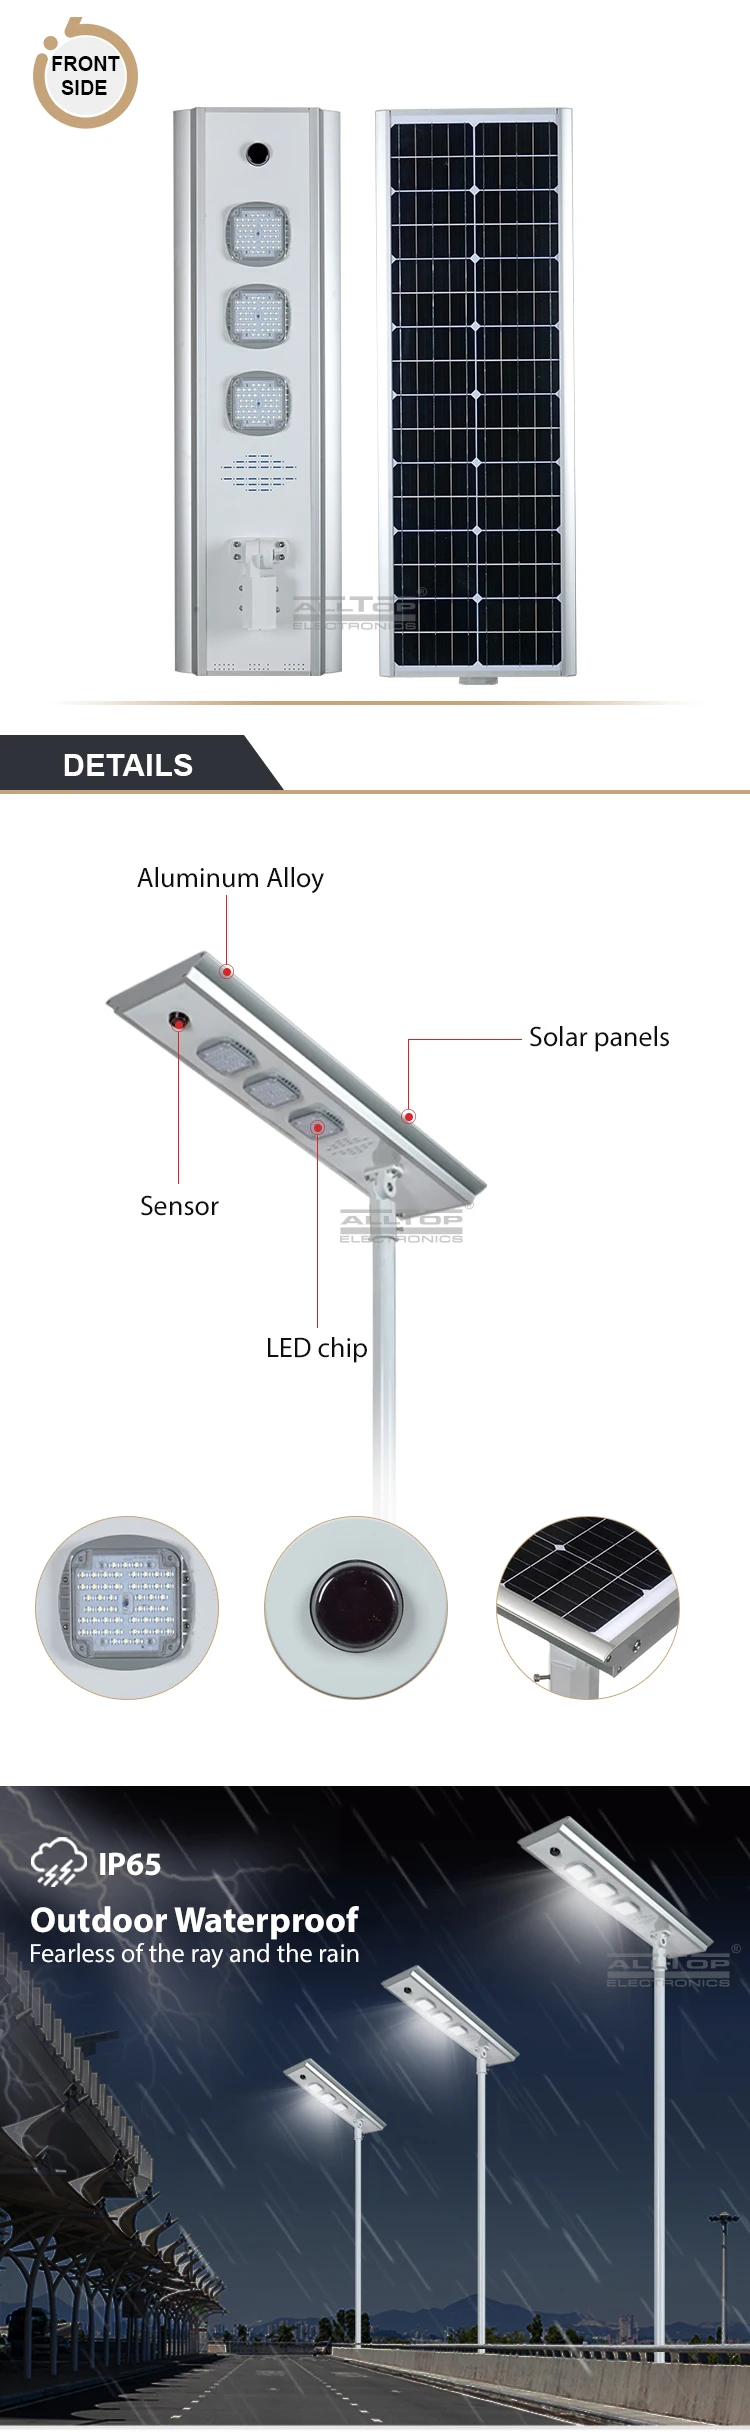 ALLTOP Energy saving waterproof outdoor lighting ip65 smd 50w 100w 150w integrated all in one led solar street light